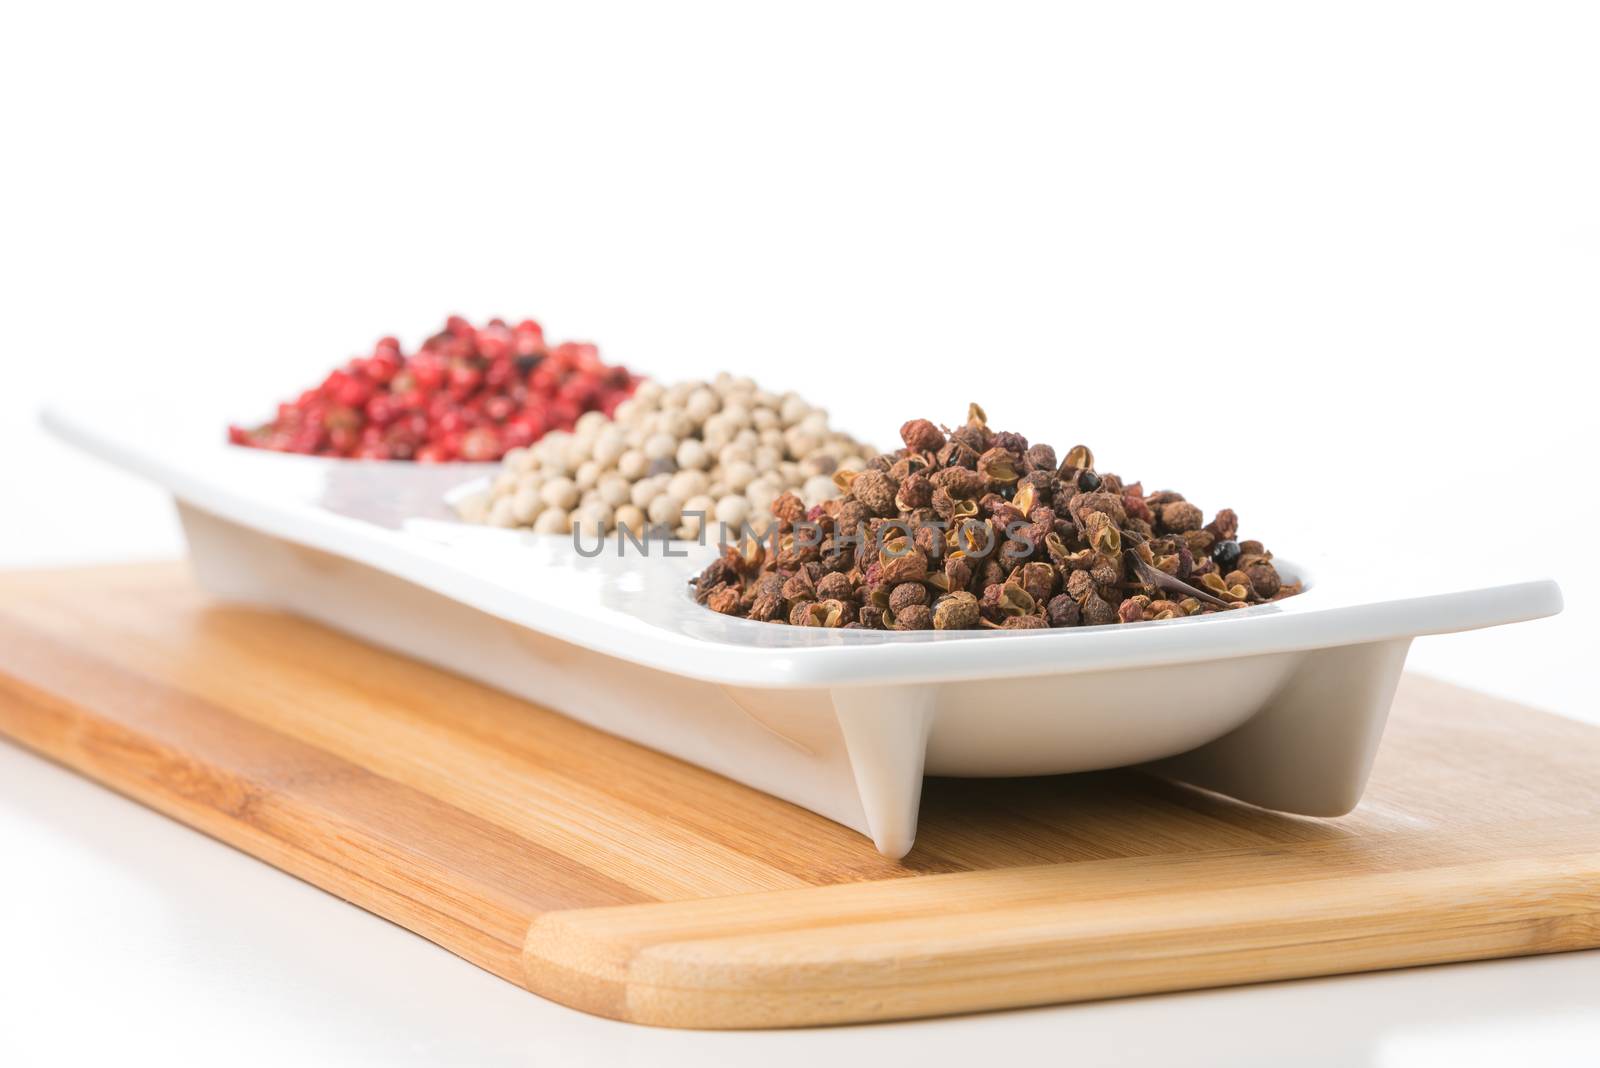 Whole szechuan peppercorns with white and pink peppercorns in the background.